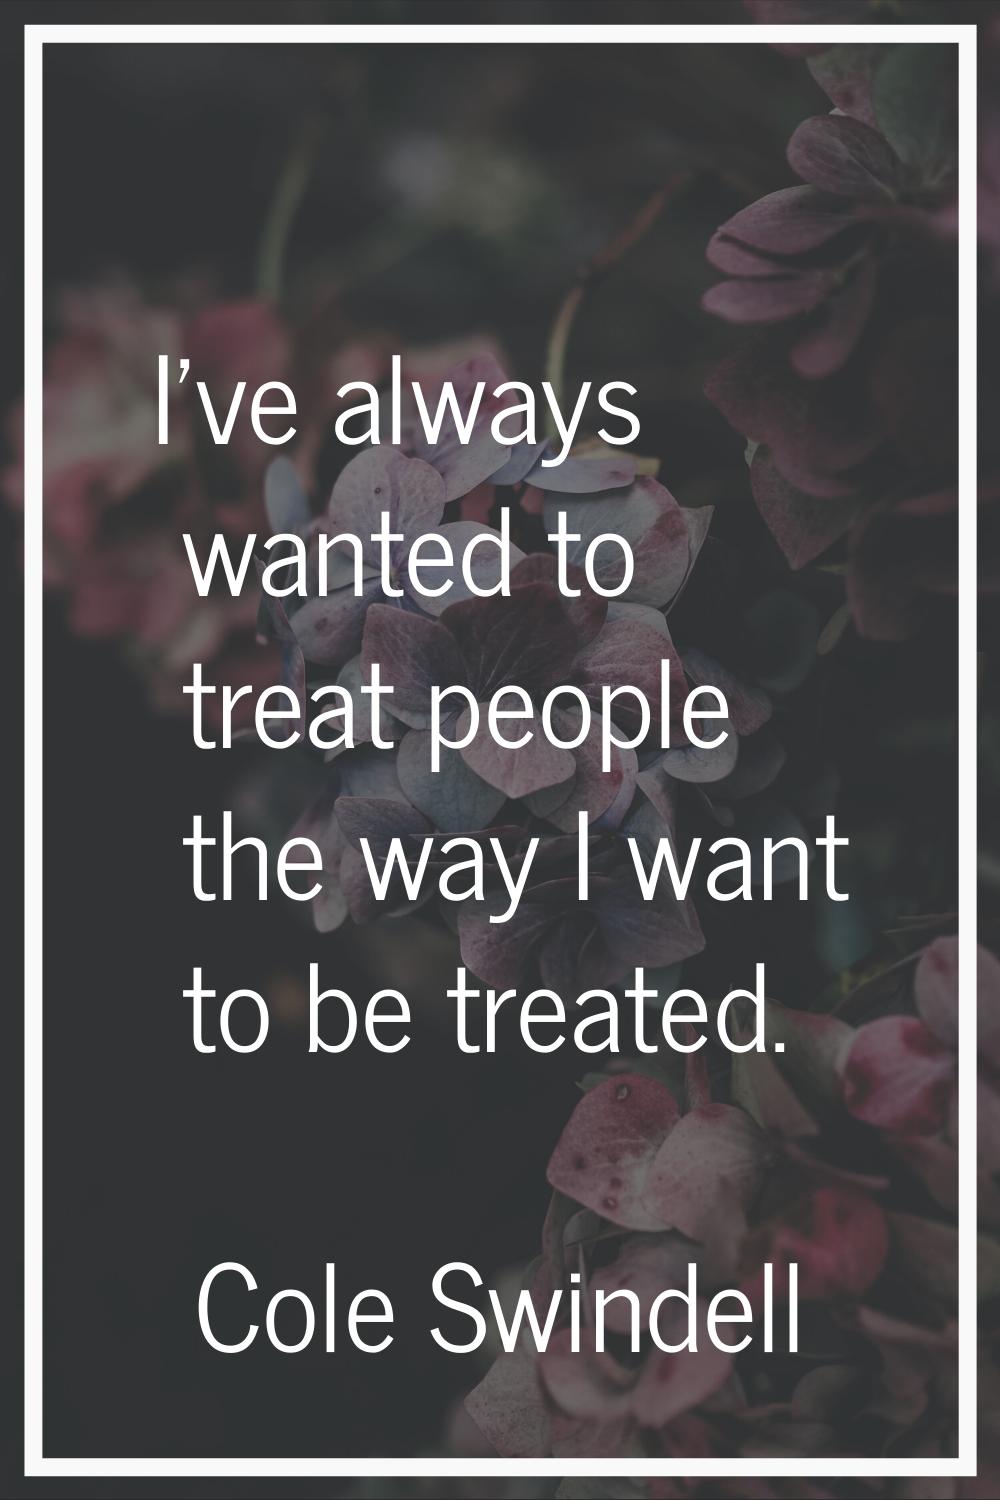 I've always wanted to treat people the way I want to be treated.